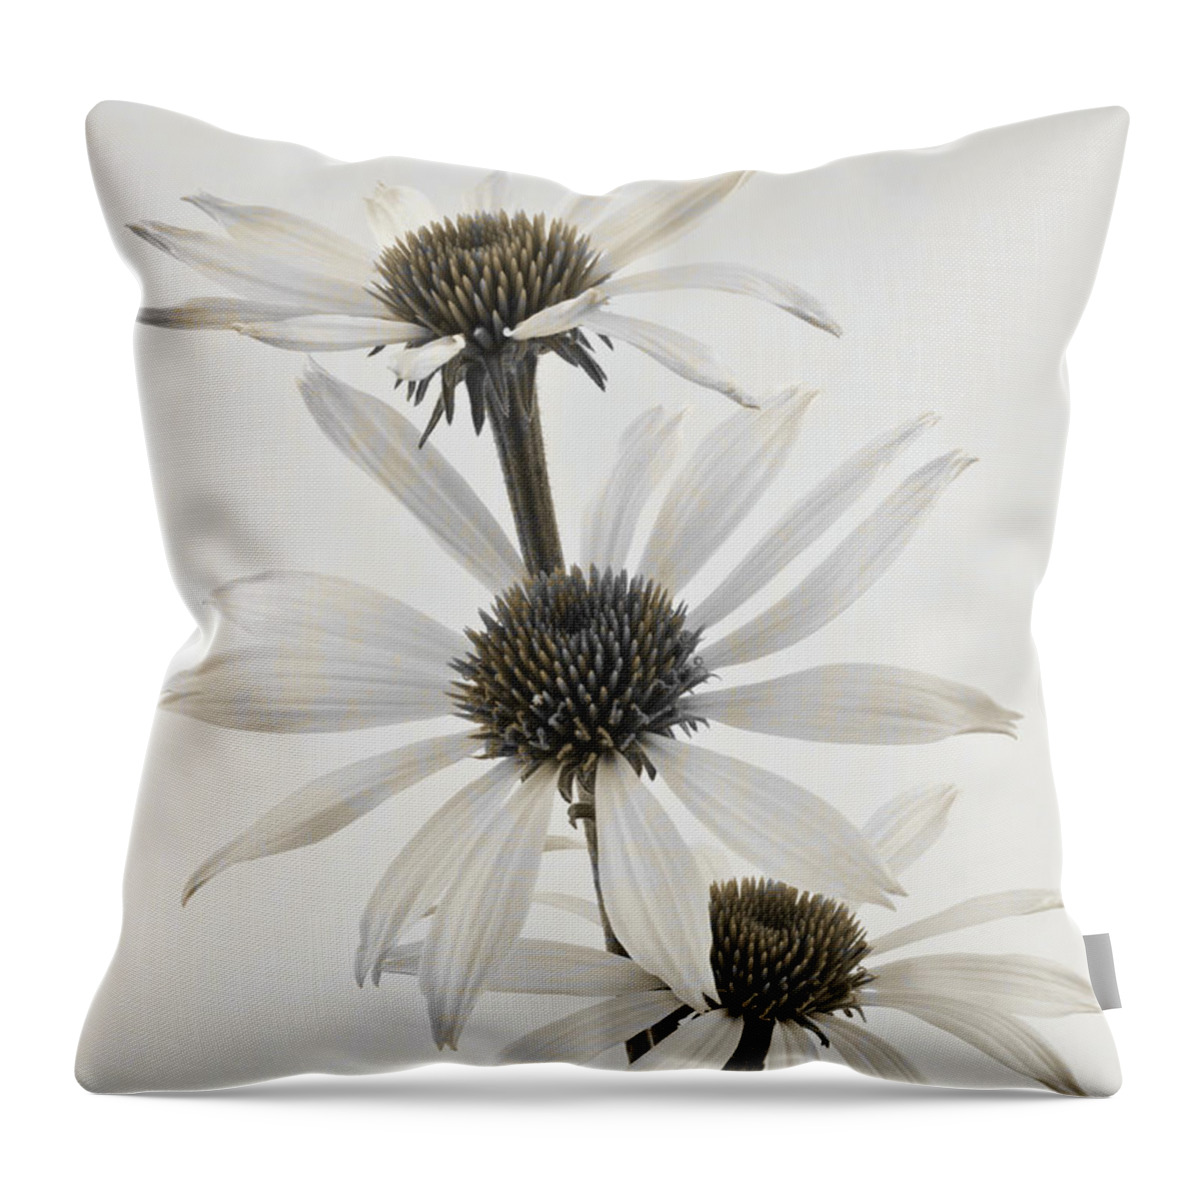 Cone Flowers Throw Pillow featuring the photograph Three White Coneflowers by Sandra Foster